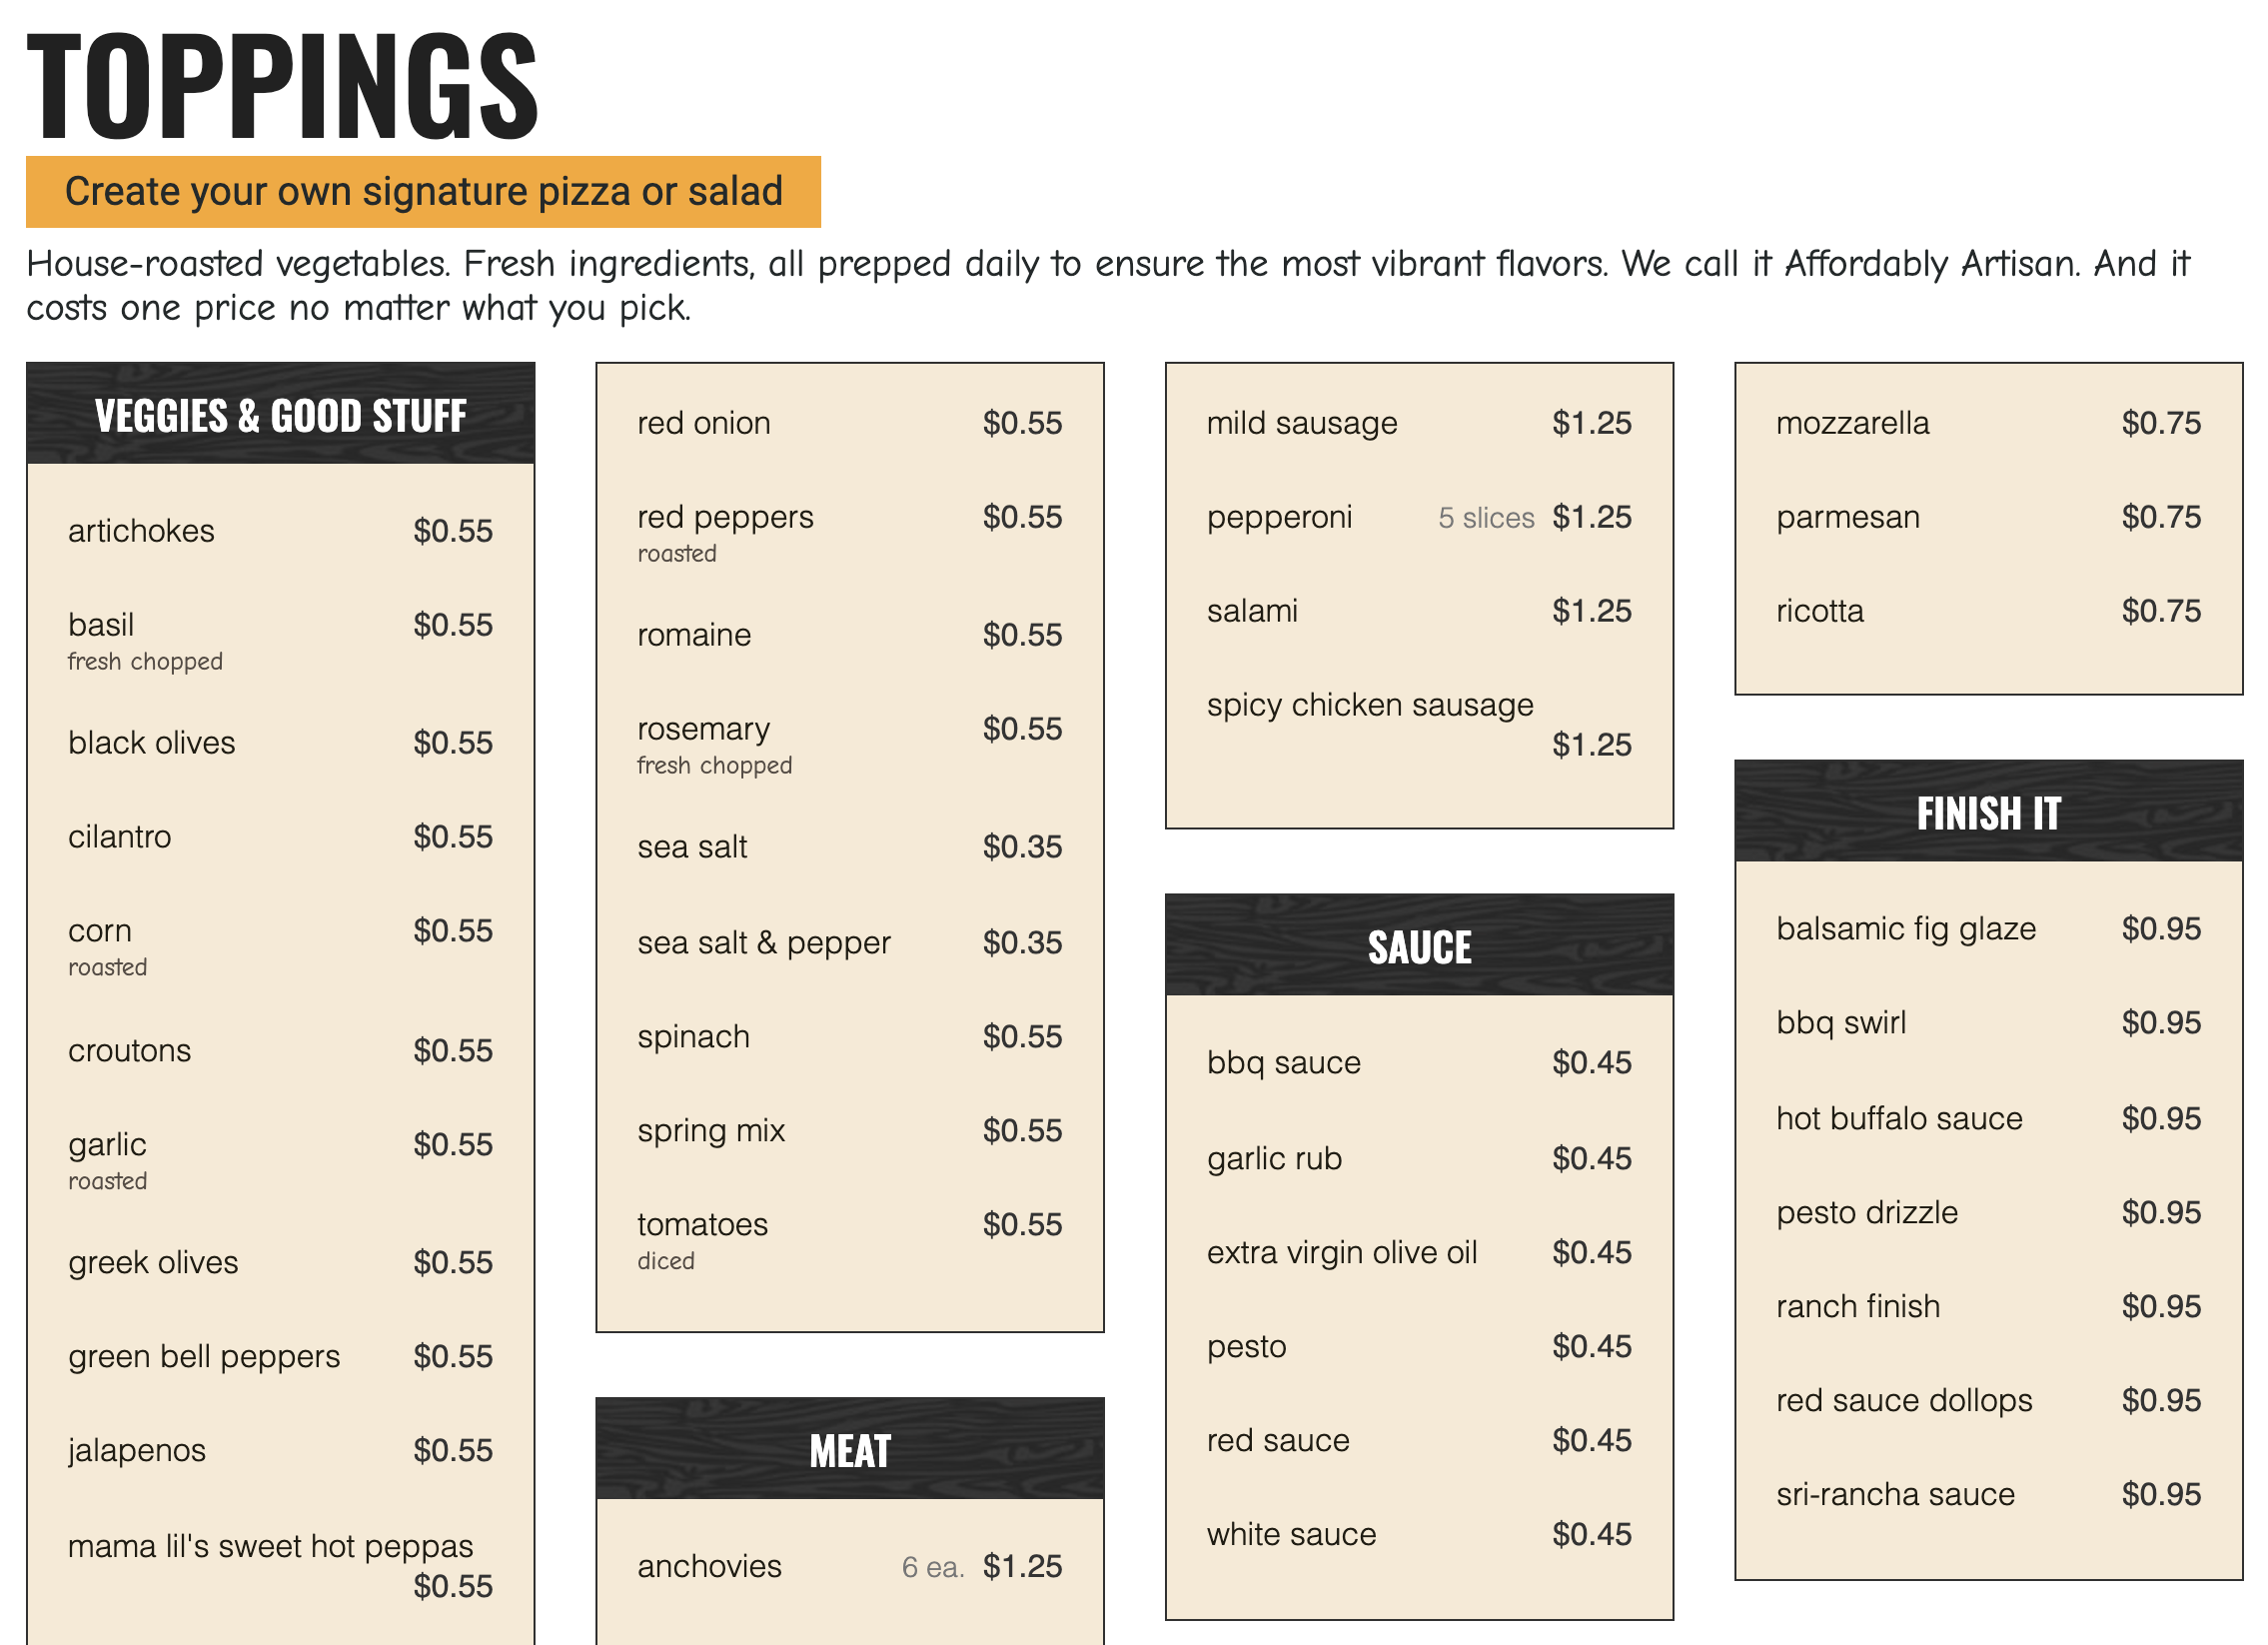 Menu layout for columned text menu with Pizzeria design.